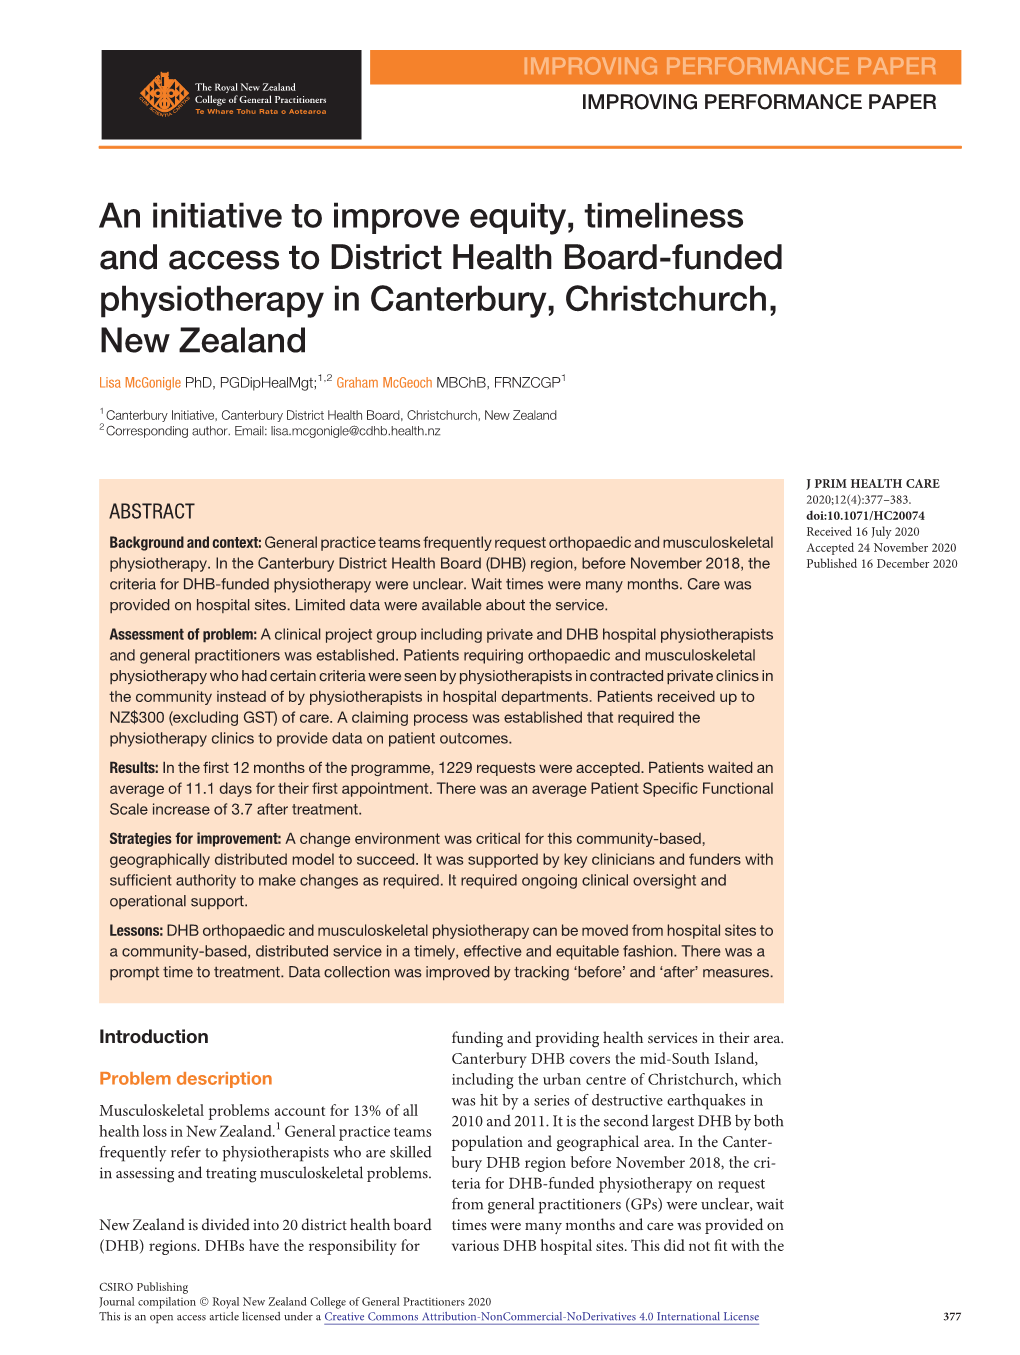 An Initiative to Improve Equity, Timeliness and Access to District Health Board-Funded Physiotherapy in Canterbury, Christchurch, New Zealand